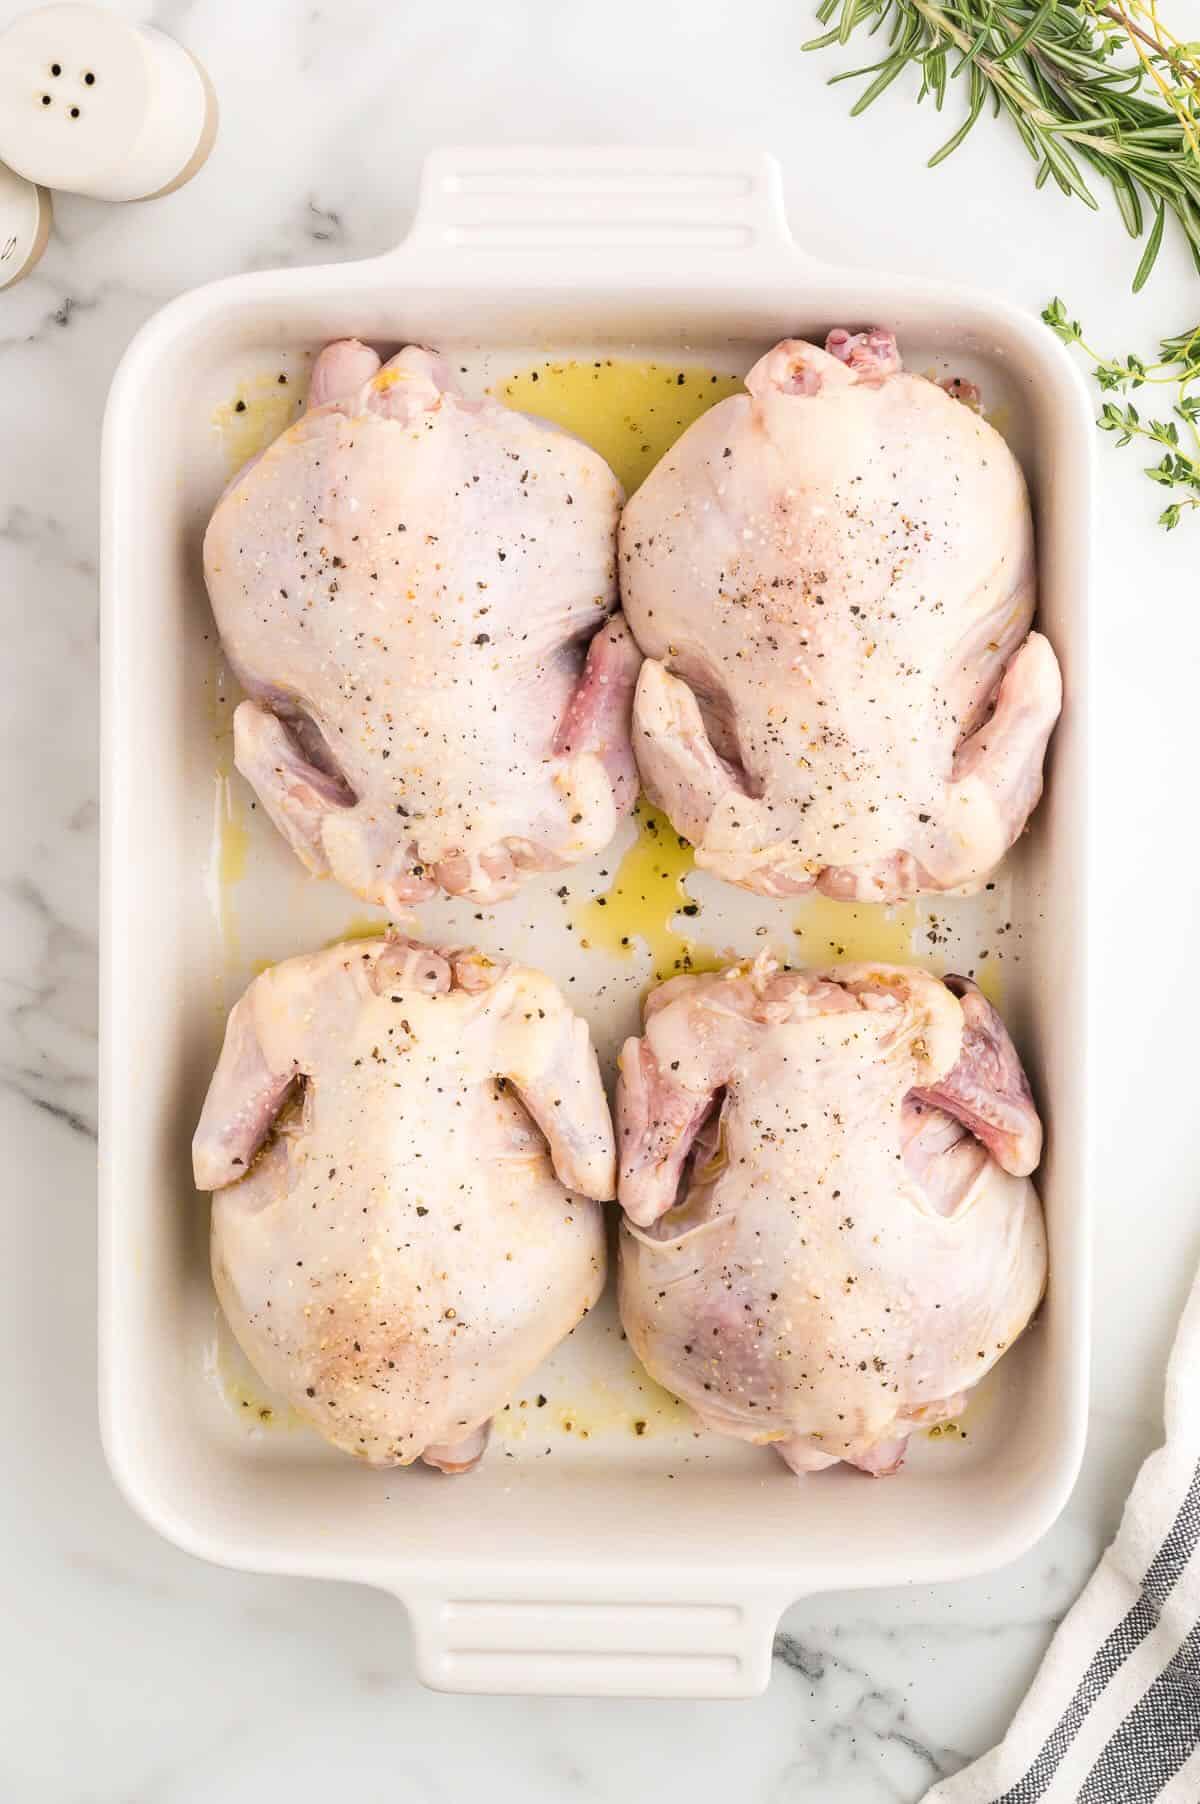 Four cornish game hens in a baking dish seasoned with salt and pepper.